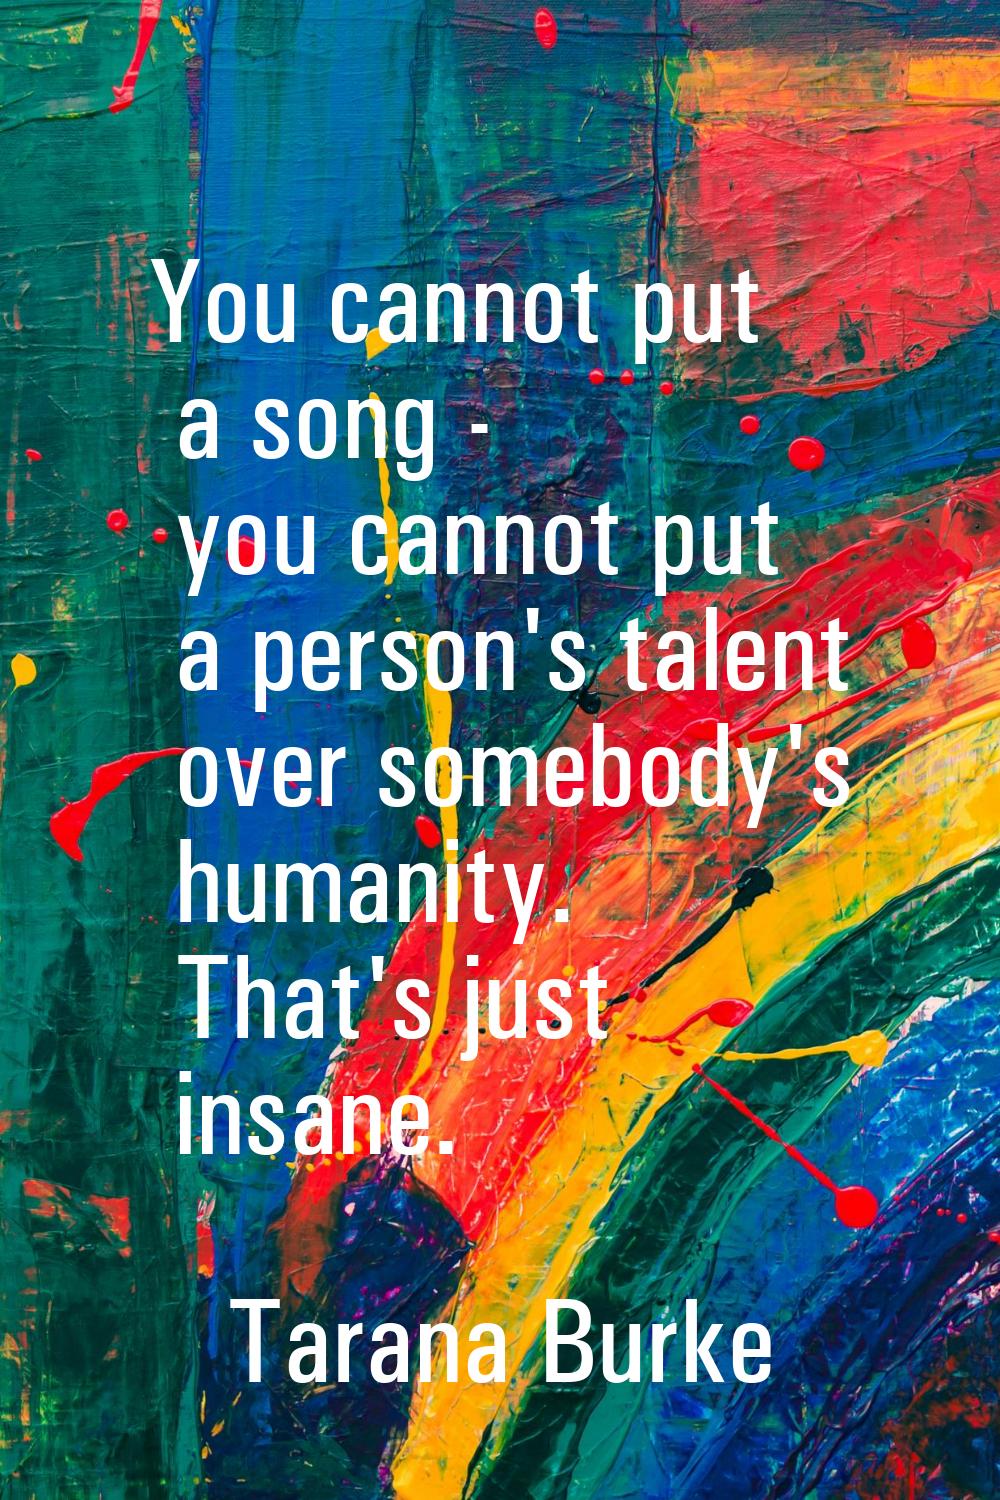 You cannot put a song - you cannot put a person's talent over somebody's humanity. That's just insa